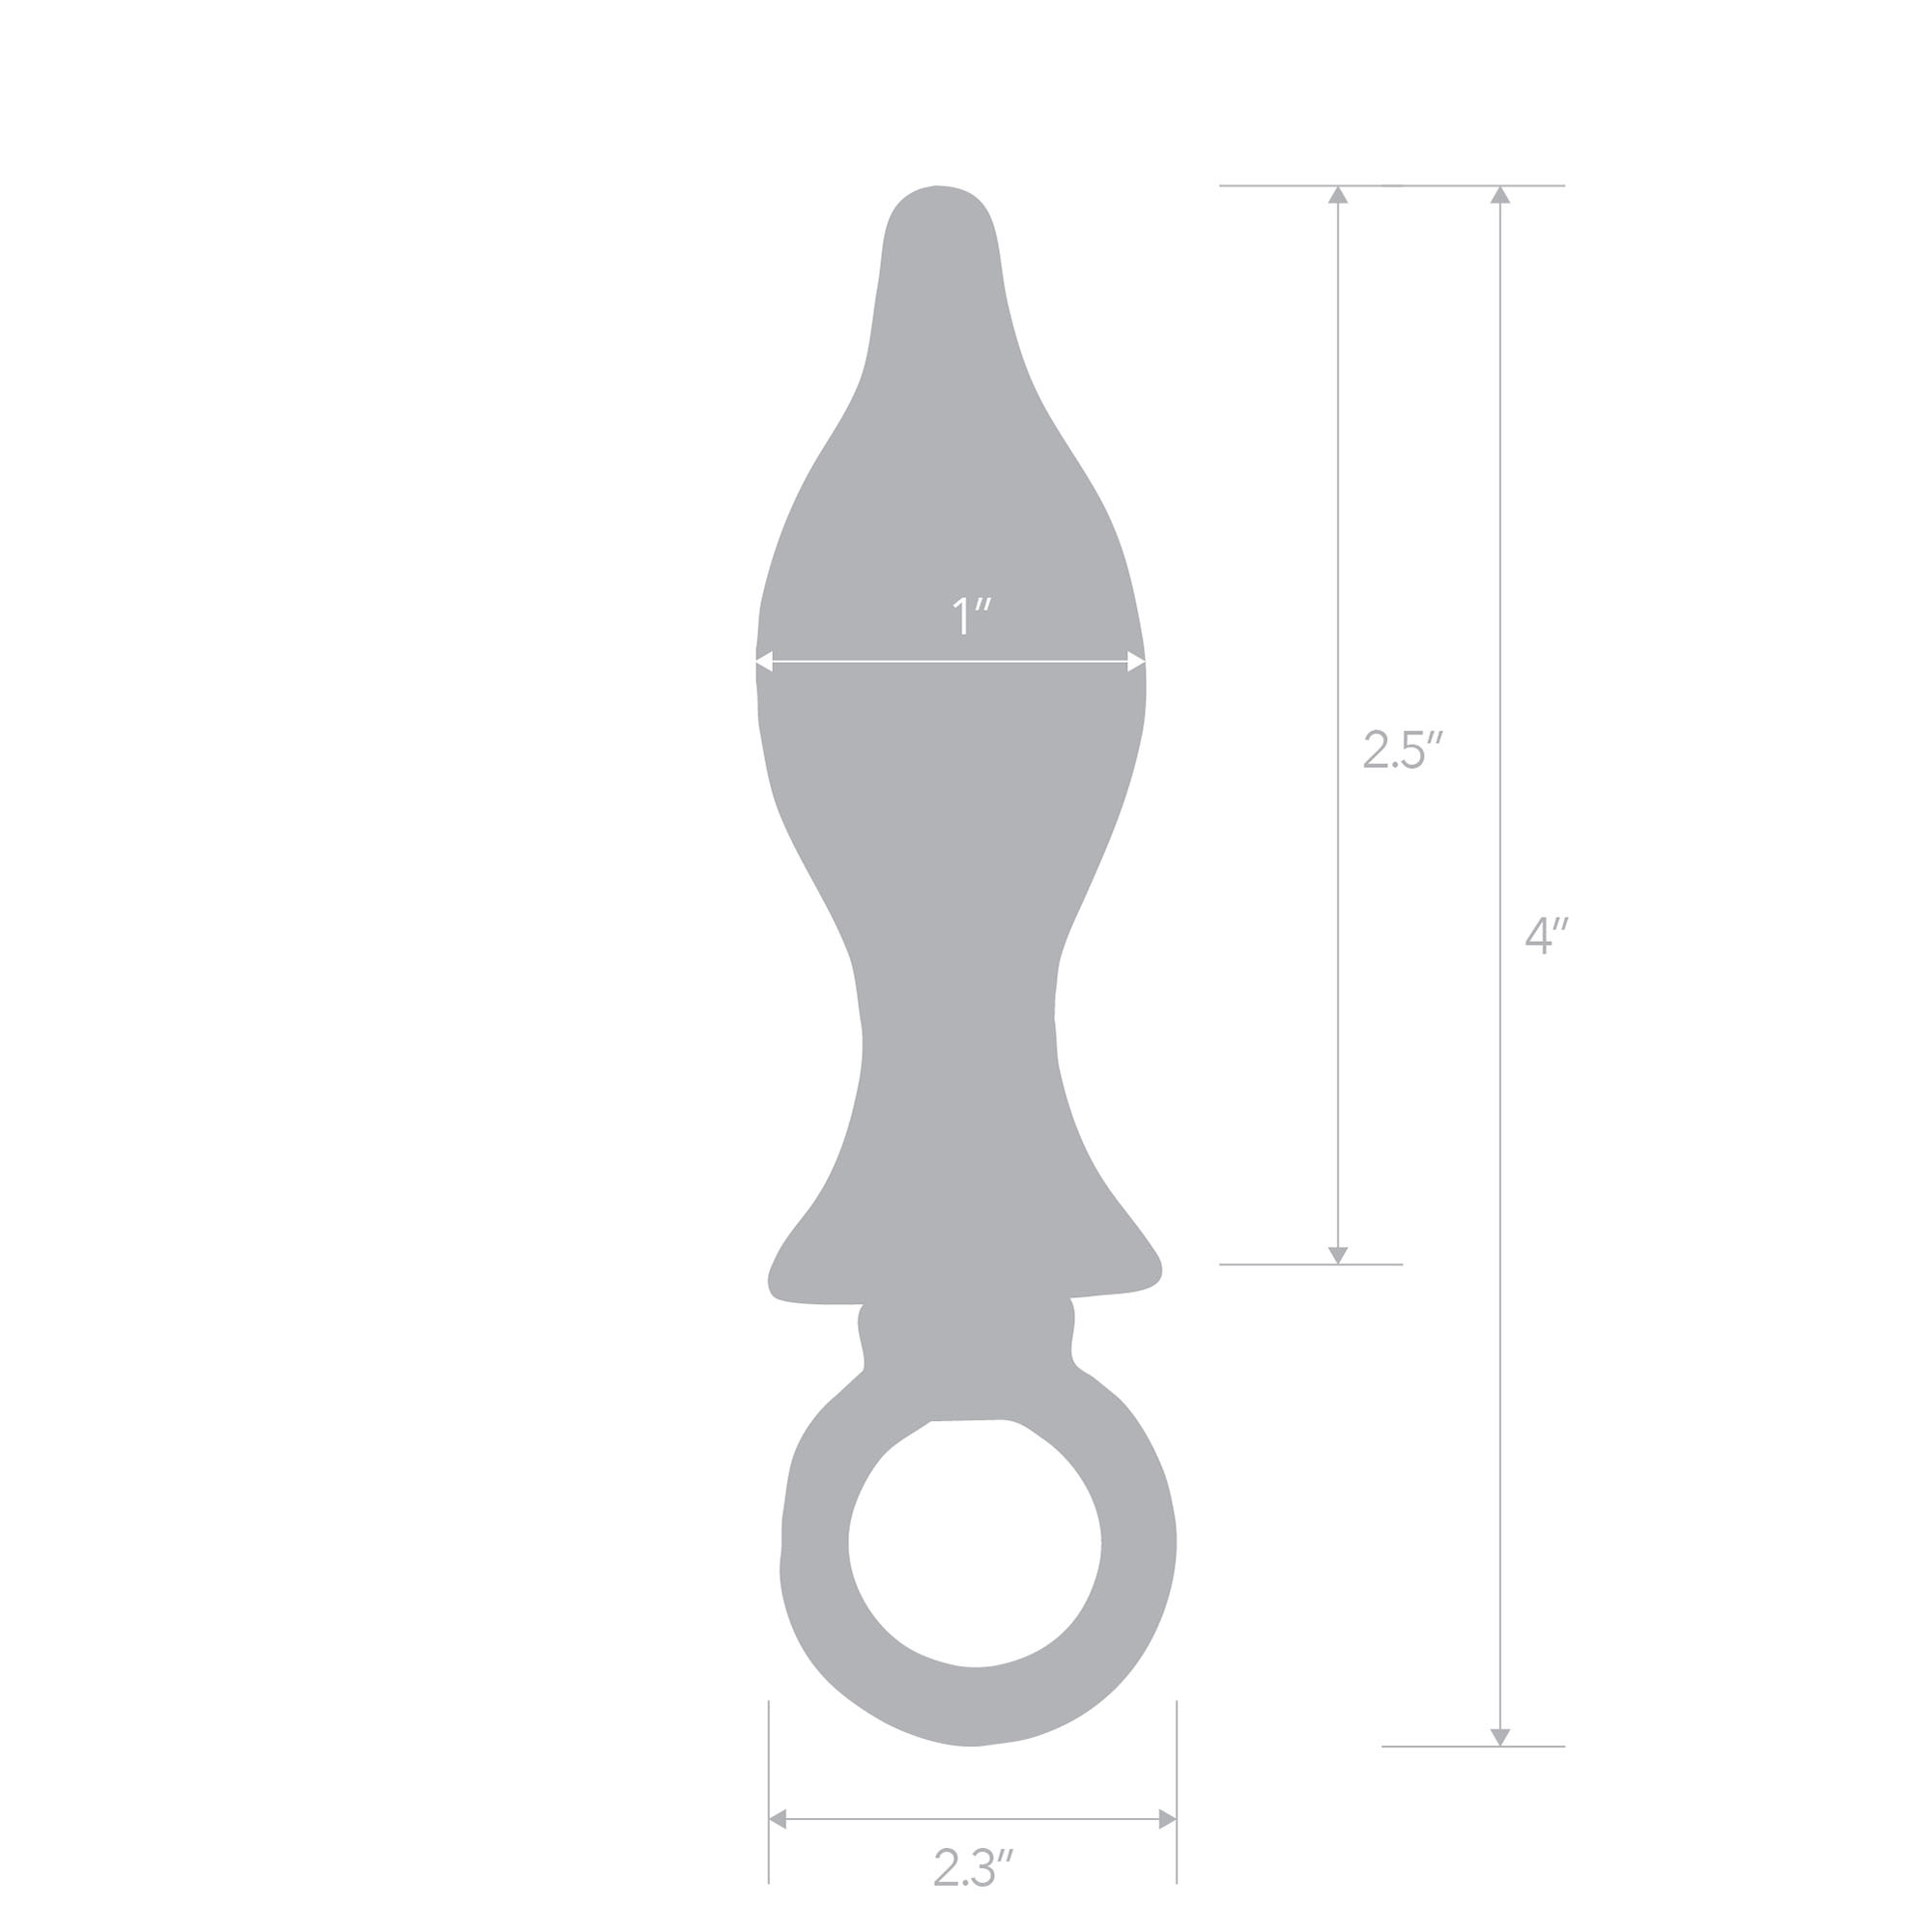 BLUE LINE C&B GEAR Stainless Steel Butt Plug with loop